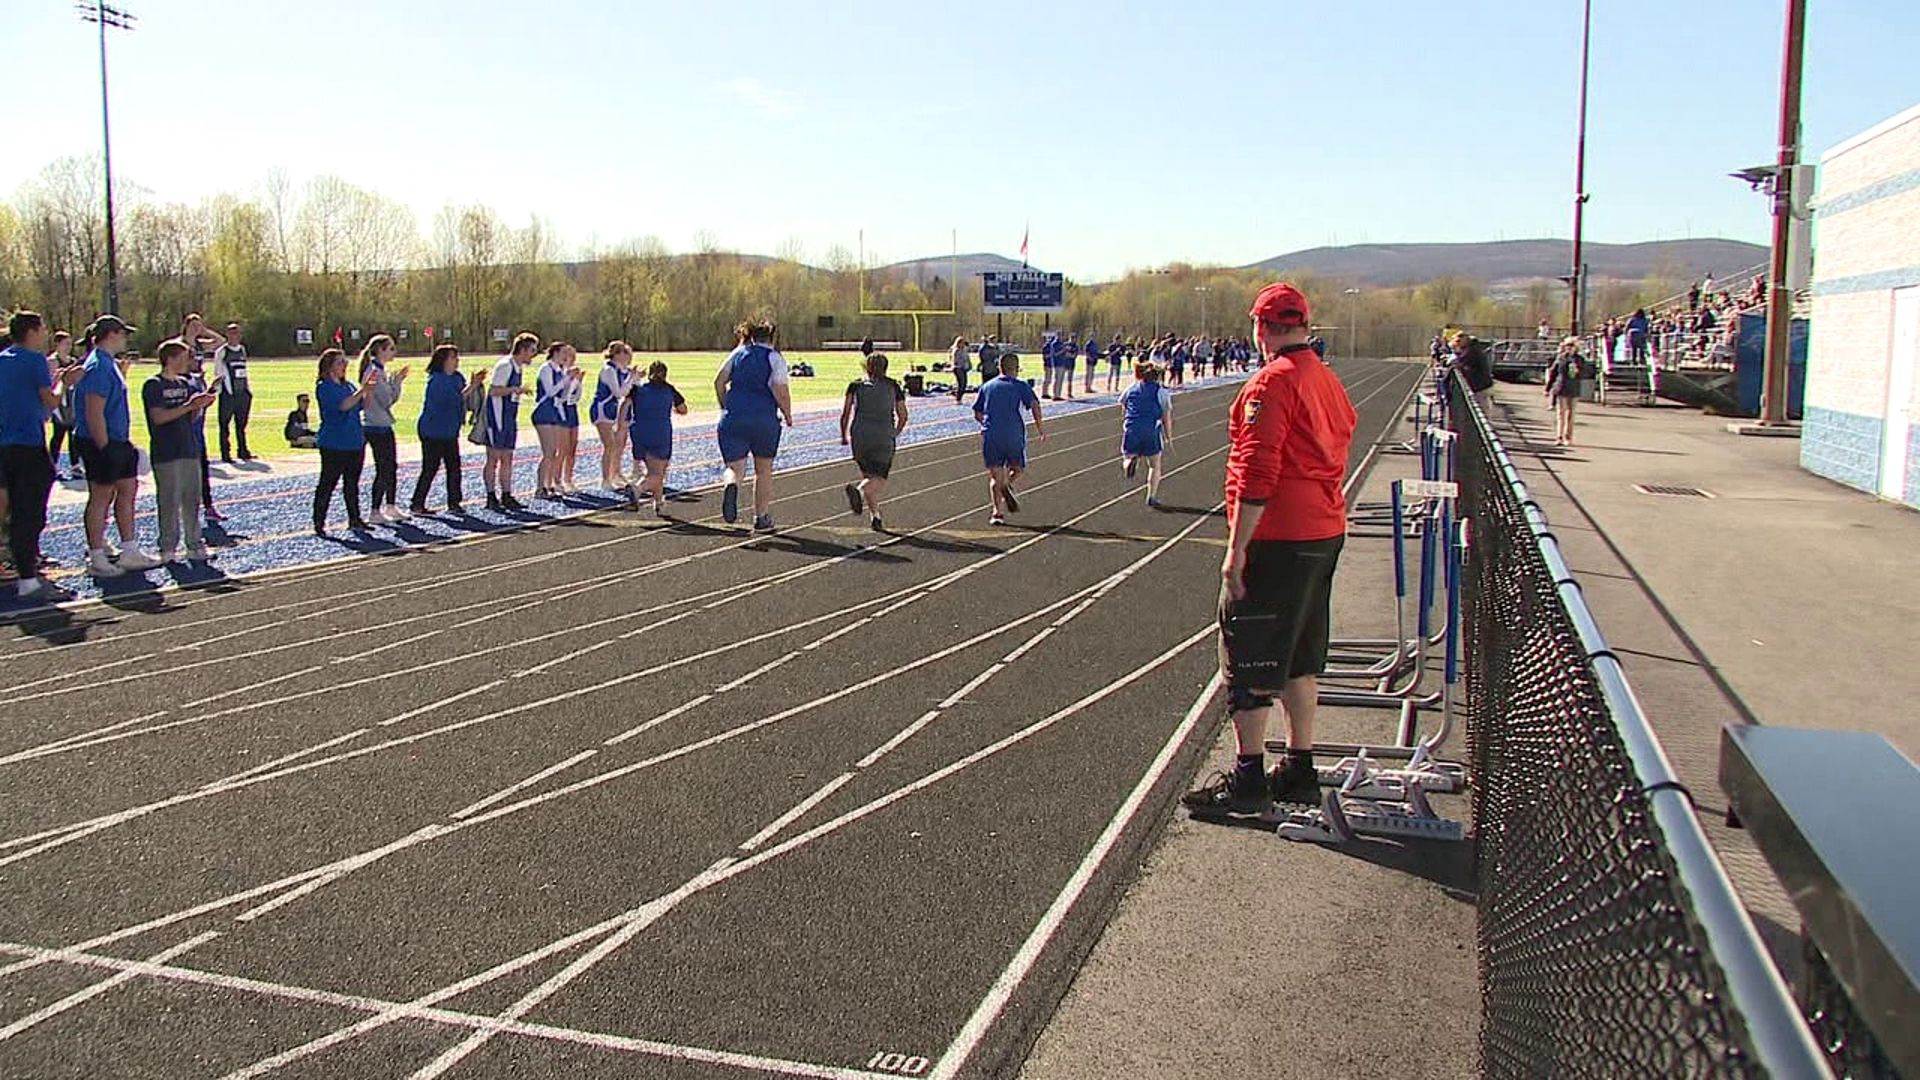 The Mid-Valley School District in Lackawanna County celebrated the opening of its new stadium on Thursday with a unique track meet.